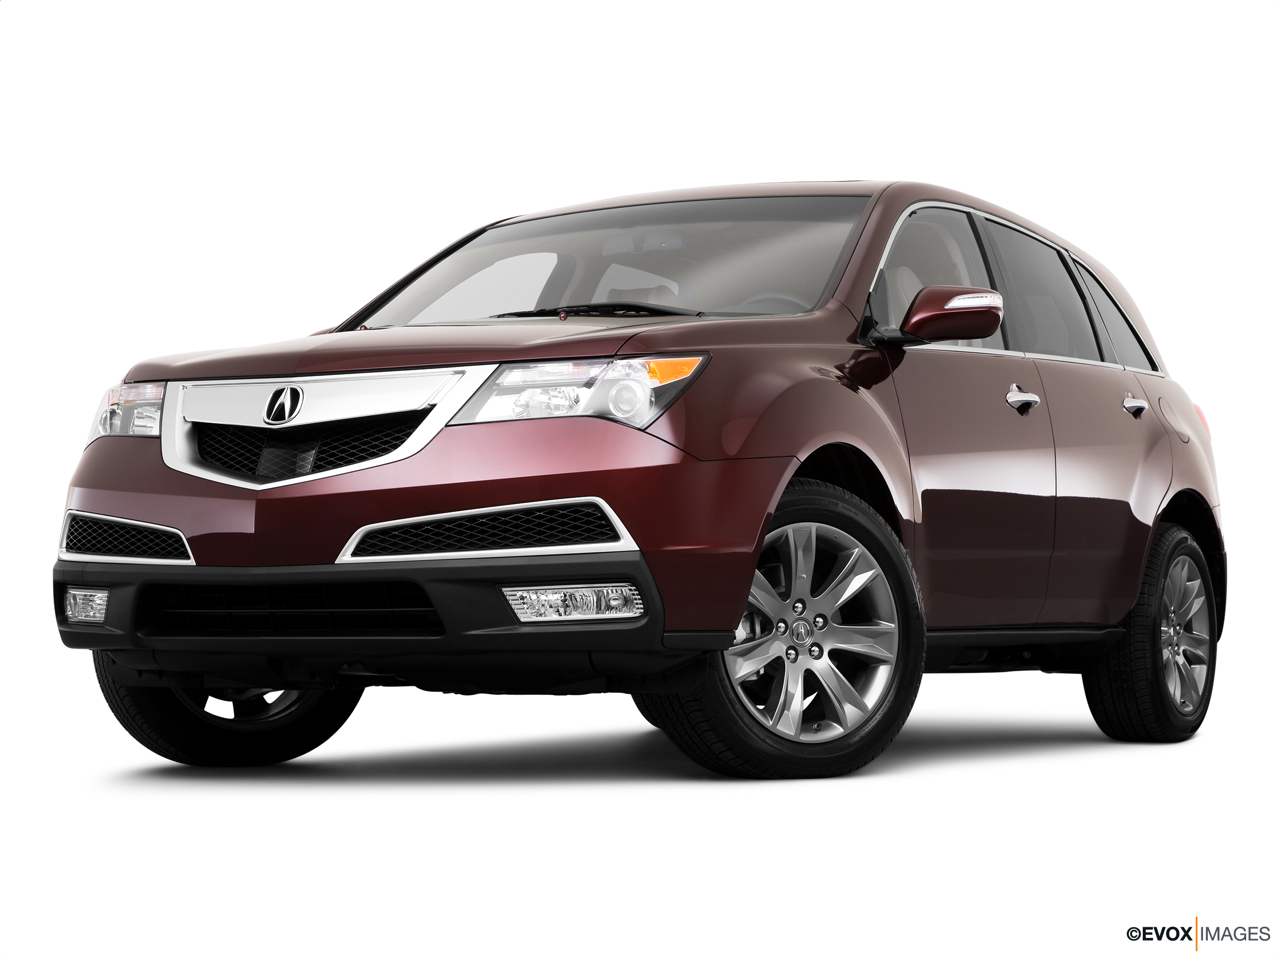 2010 Acura MDX MDX Front angle view, low wide perspective. 